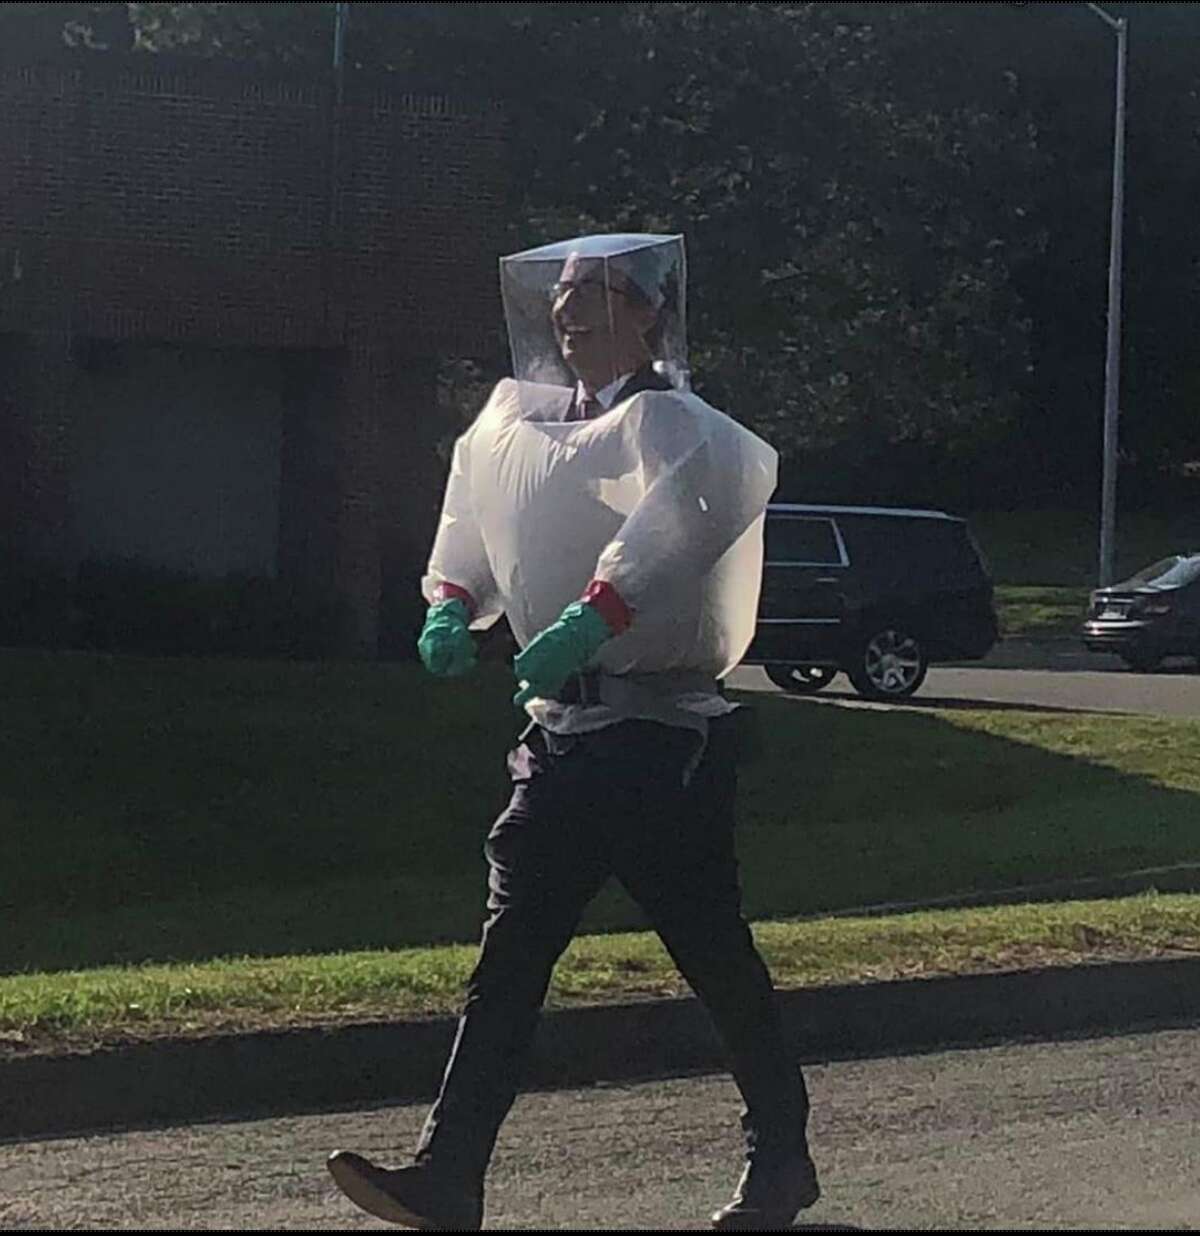 Danbury Mayor Mark Boughton posted this photo from Oct. 10 of John Oliver dressed as a "bubble boy" in Danbury. He captioned it: "Great and glorious visit by Mr. John Oliver." The video showed Oliver dressed in a sort of “Bubble Boy” suit and wearing a clear plastic box over his head for the ceremony. Oliver recalled on the show how his heart pounded as he prepared to meet his destiny. “And, to a lesser extent, Mayor Mark Boughton,” he said. After the mayor cut the ribbon, Oliver gleefully cheered. He said the sewage plant represented everything the country needs most right now.